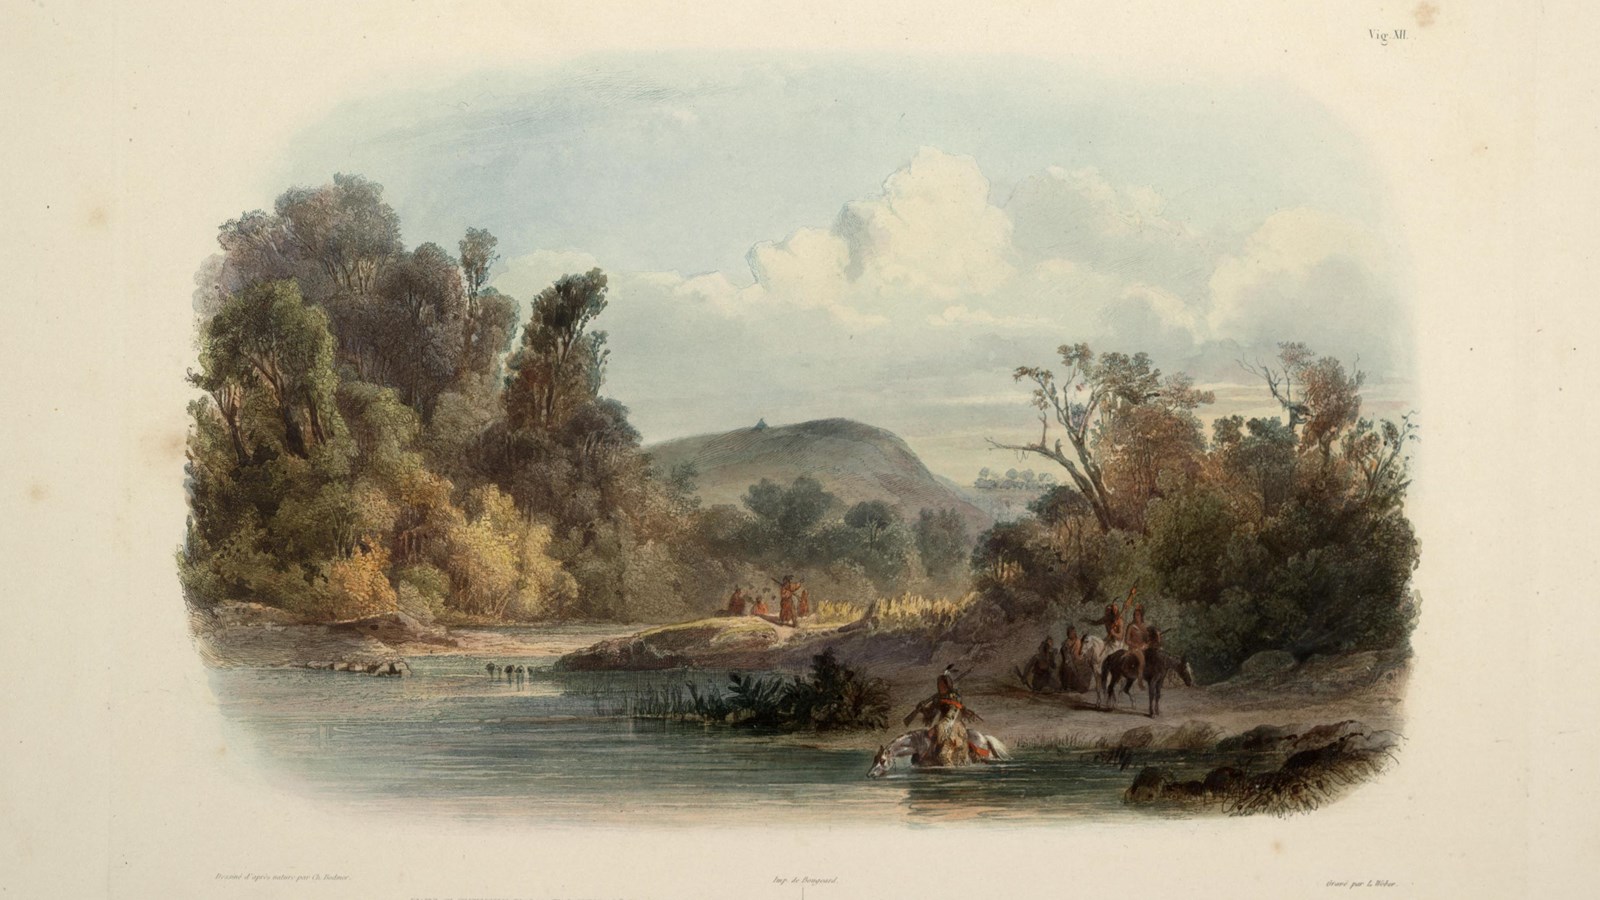 Illustration from the 1830s showing a river with unidentified tribal members at the river\'s edge, so